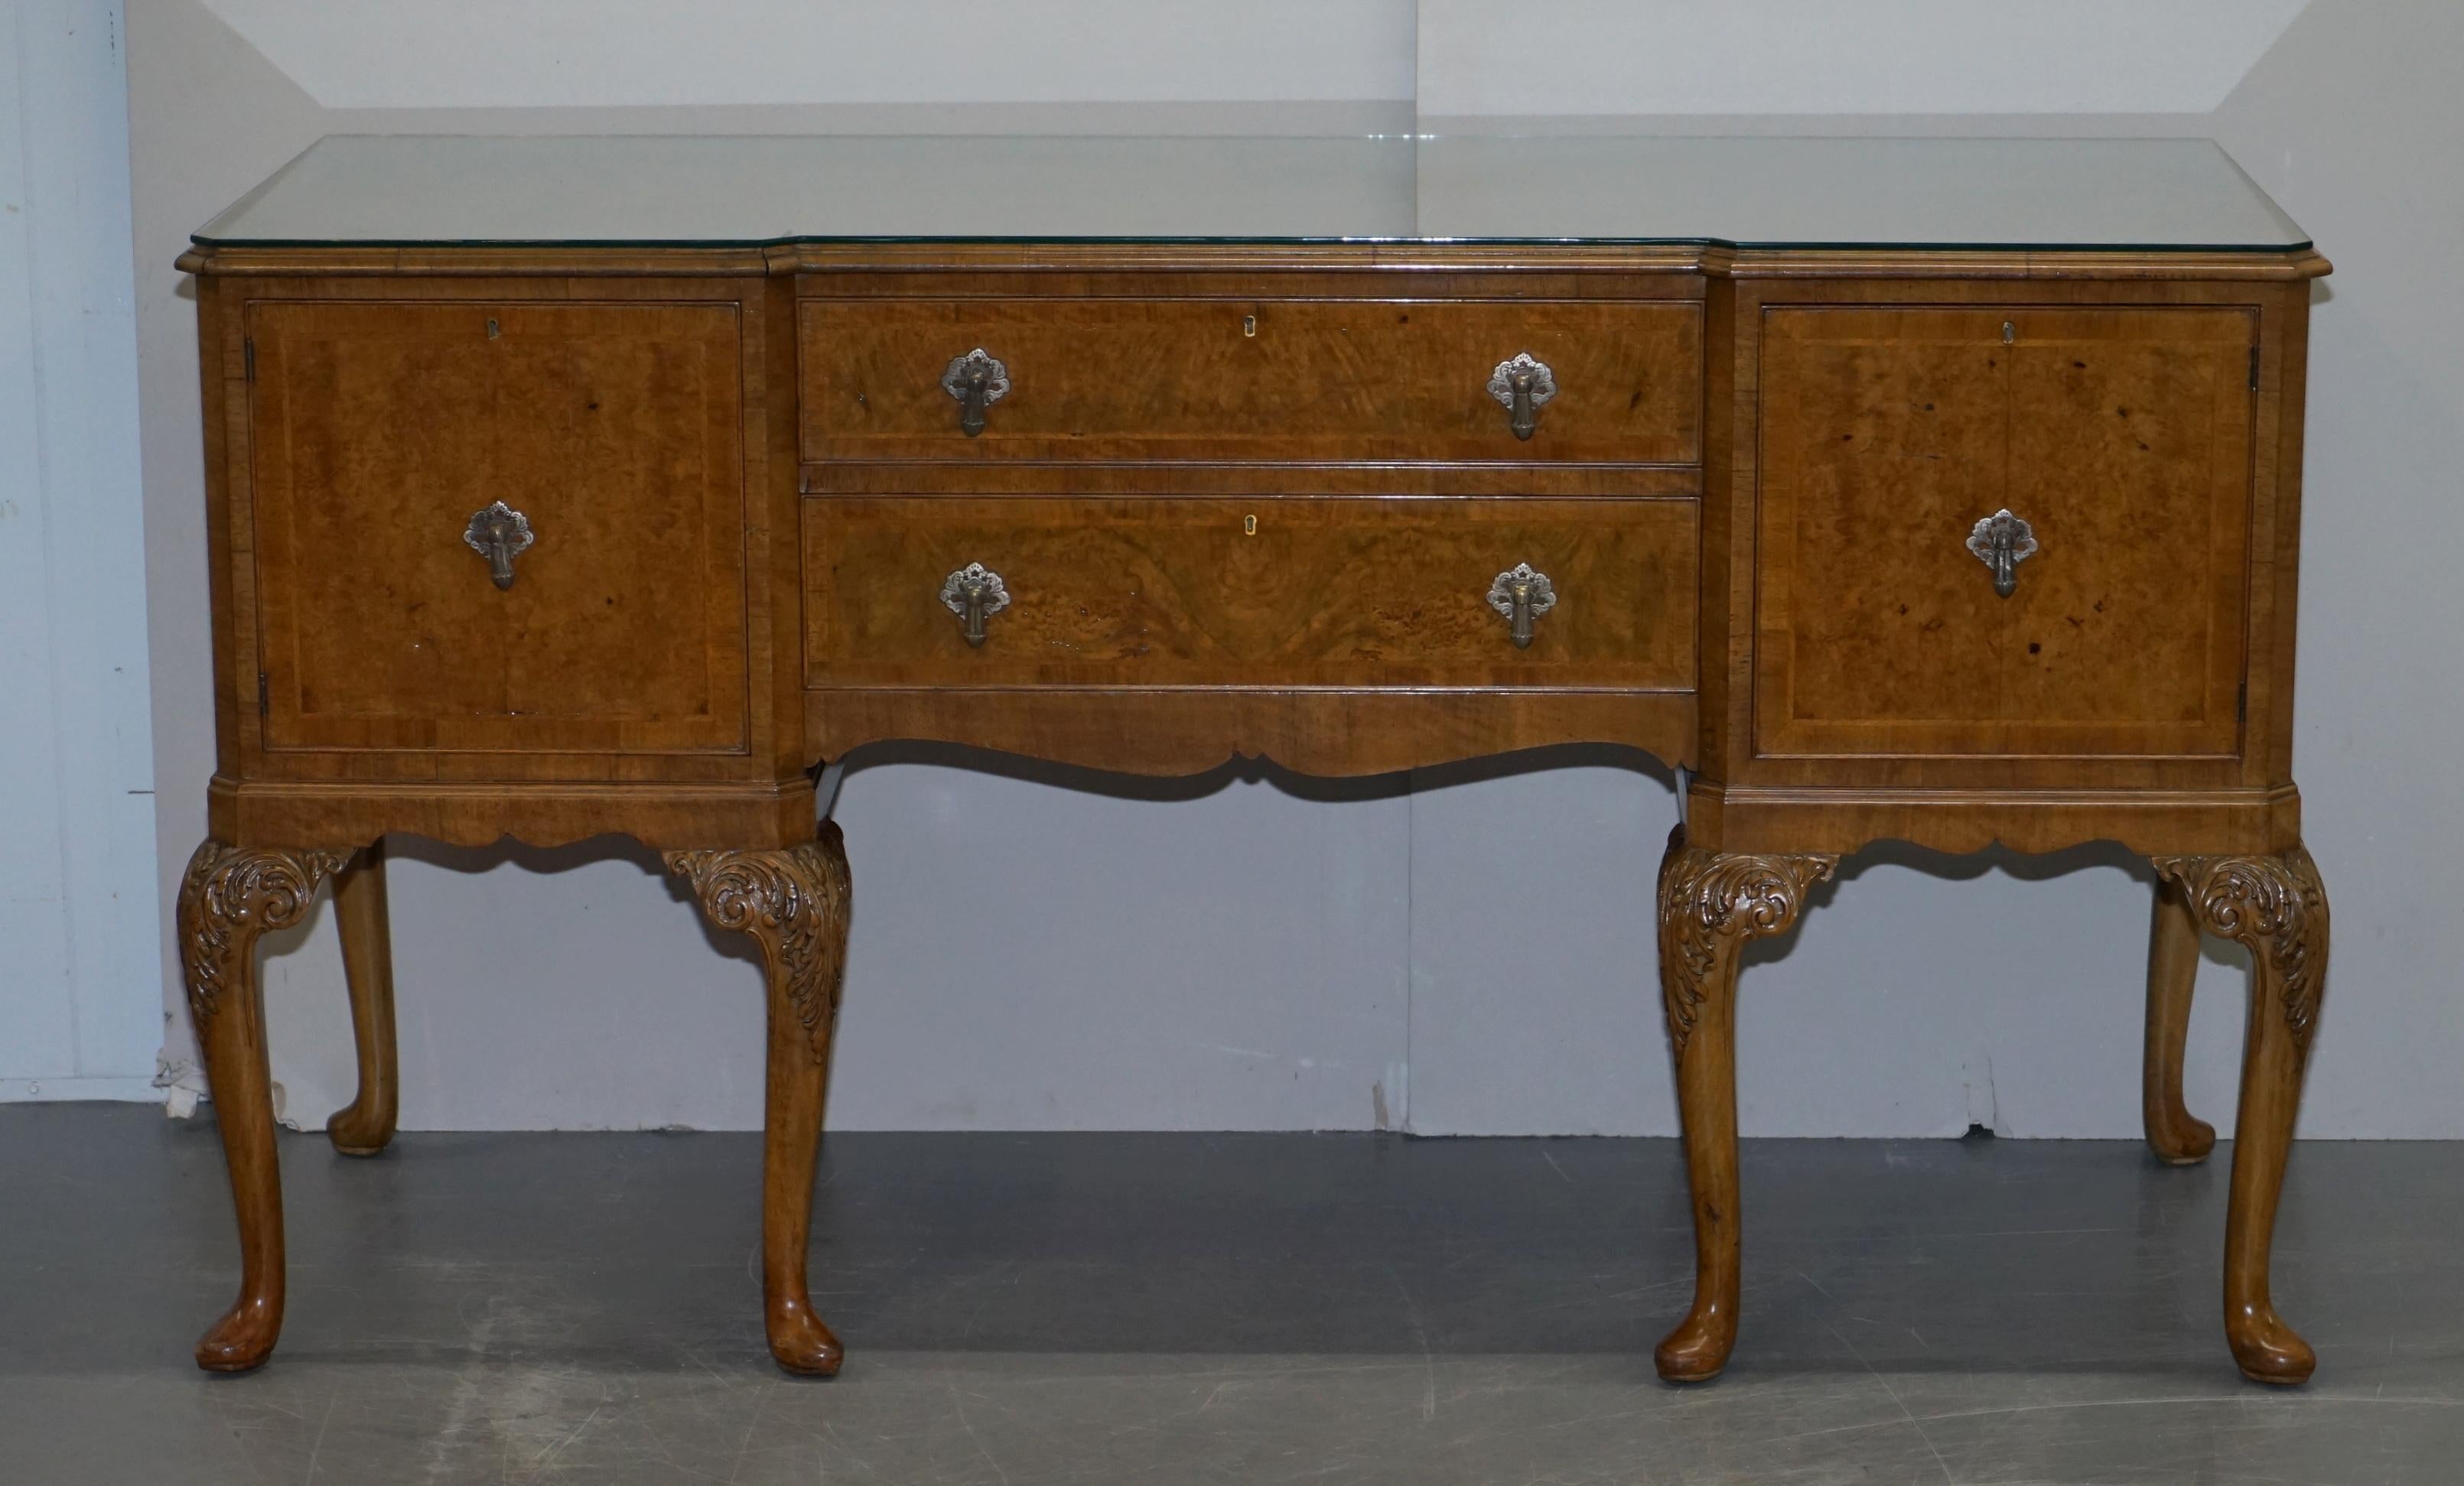 We are delighted to offer for sale this stunning Denby & Spinks Leeds circa 1920 Art Deco Burr Walnut inverted breakfront sideboard which is part of a large dining suite

This piece is part of a complete dining suite as mentioned, in total I have